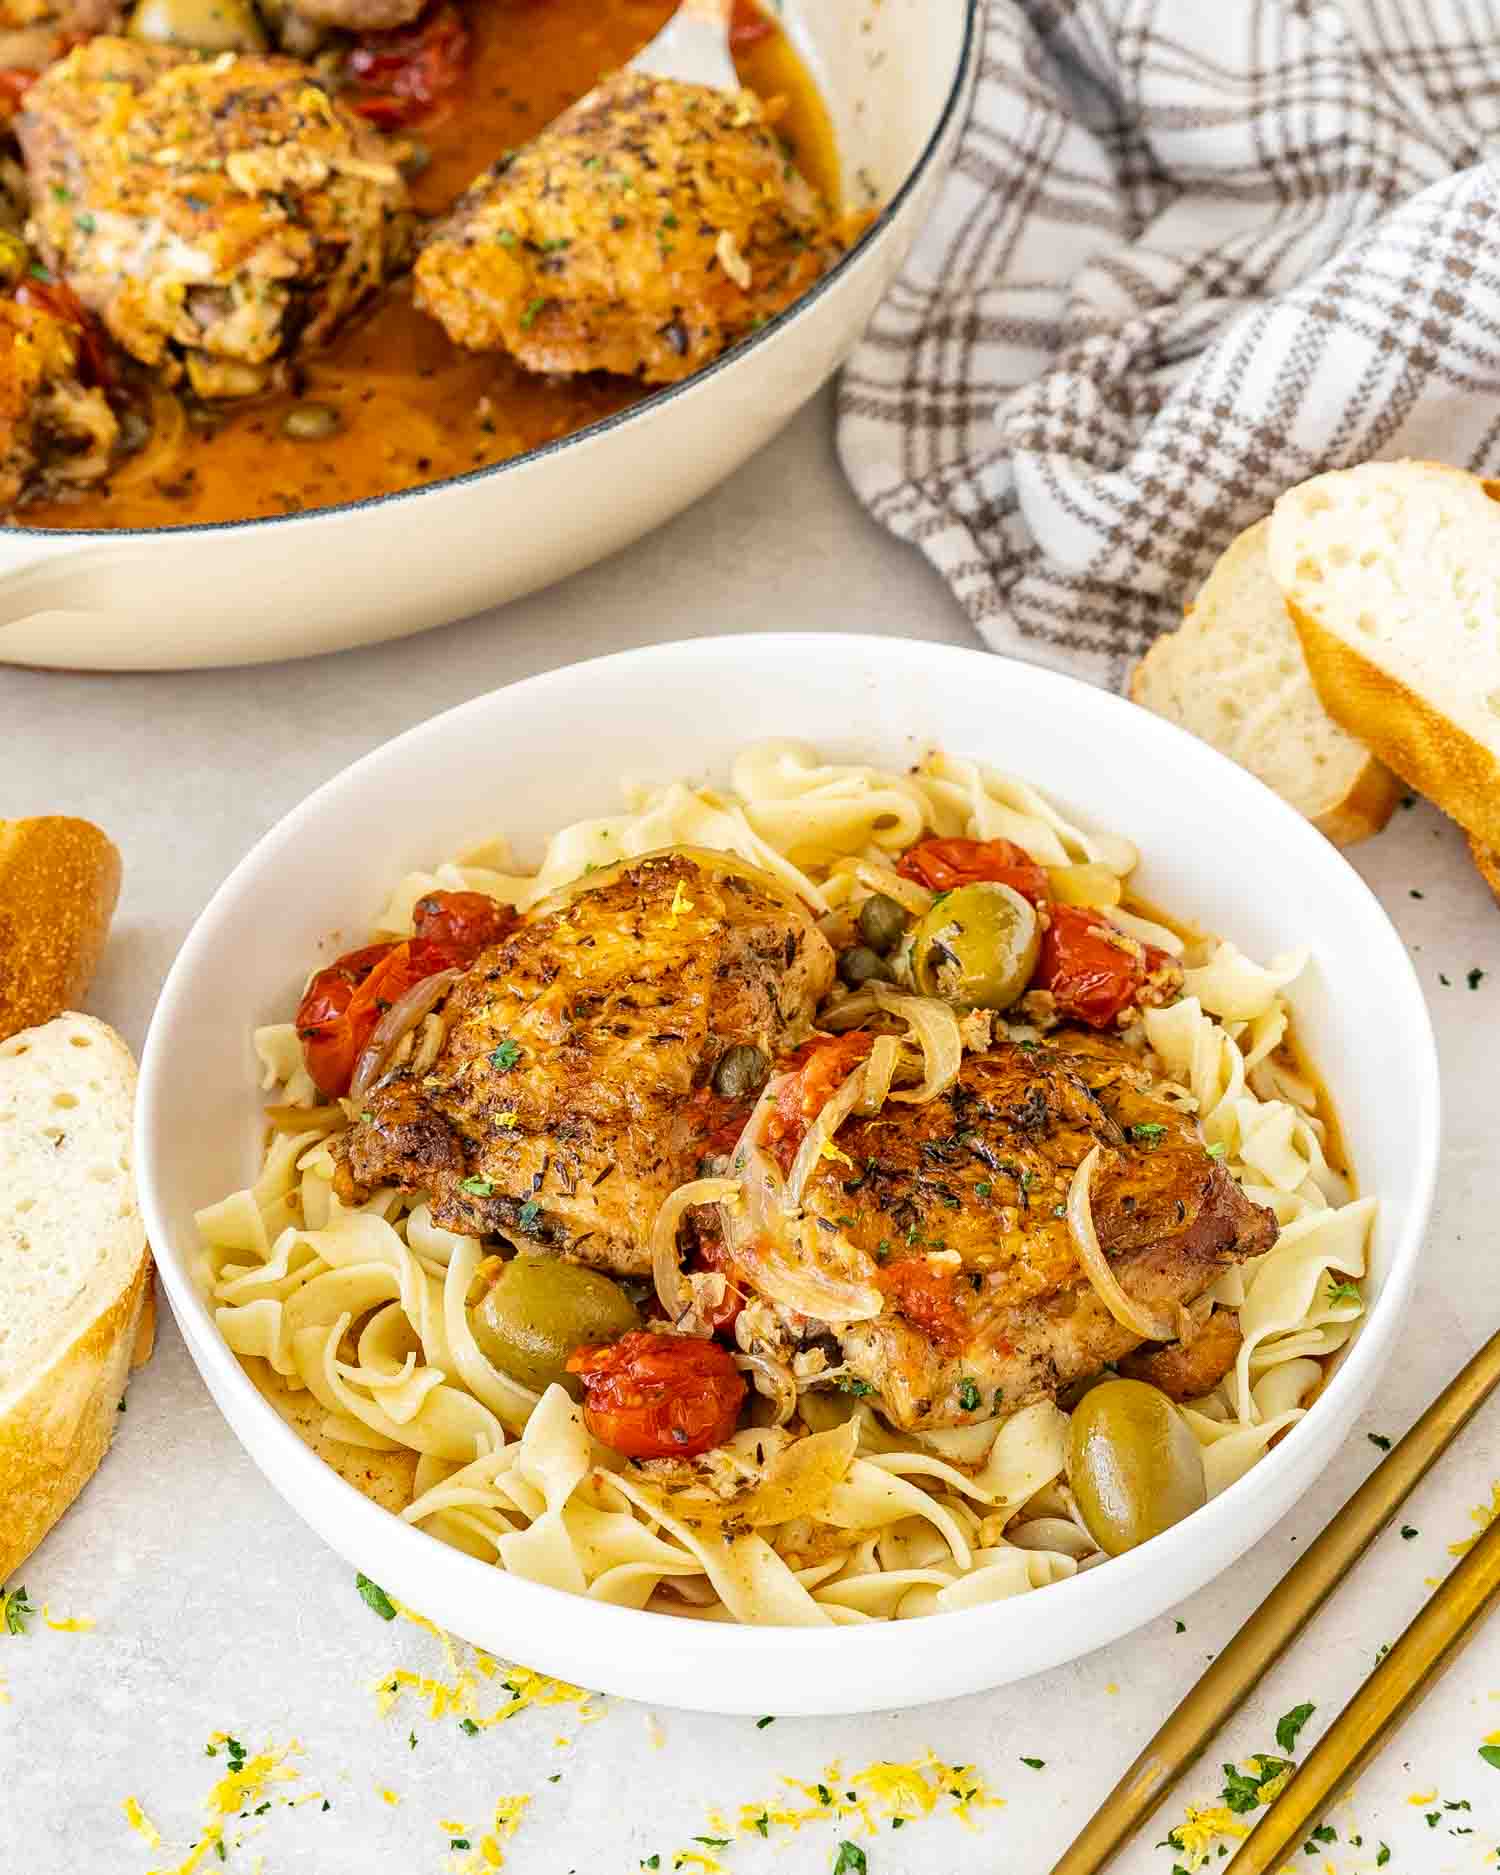 chicken provencal on a bed of noodles in a white bowl.